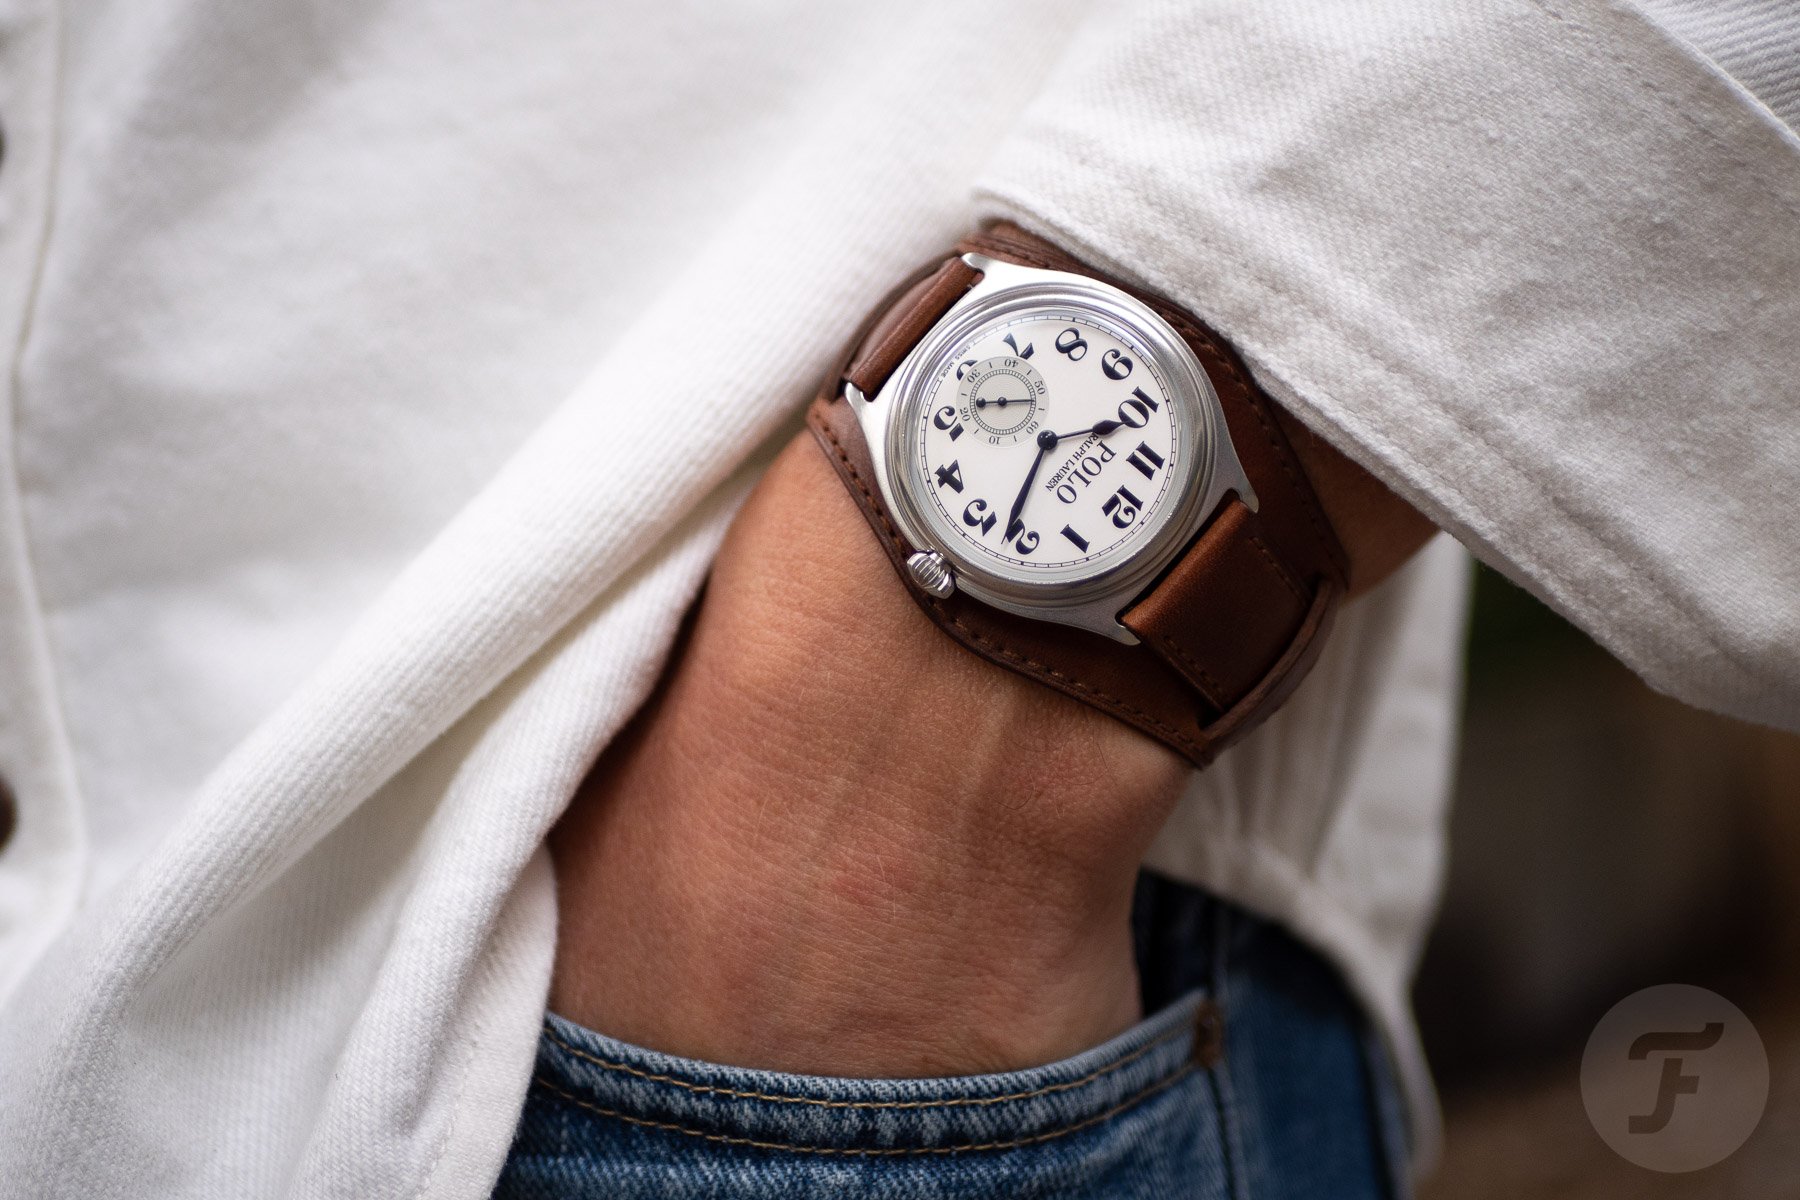 Serious Mechanical Watches From Fashion Brands — Would You Ever Buy One?